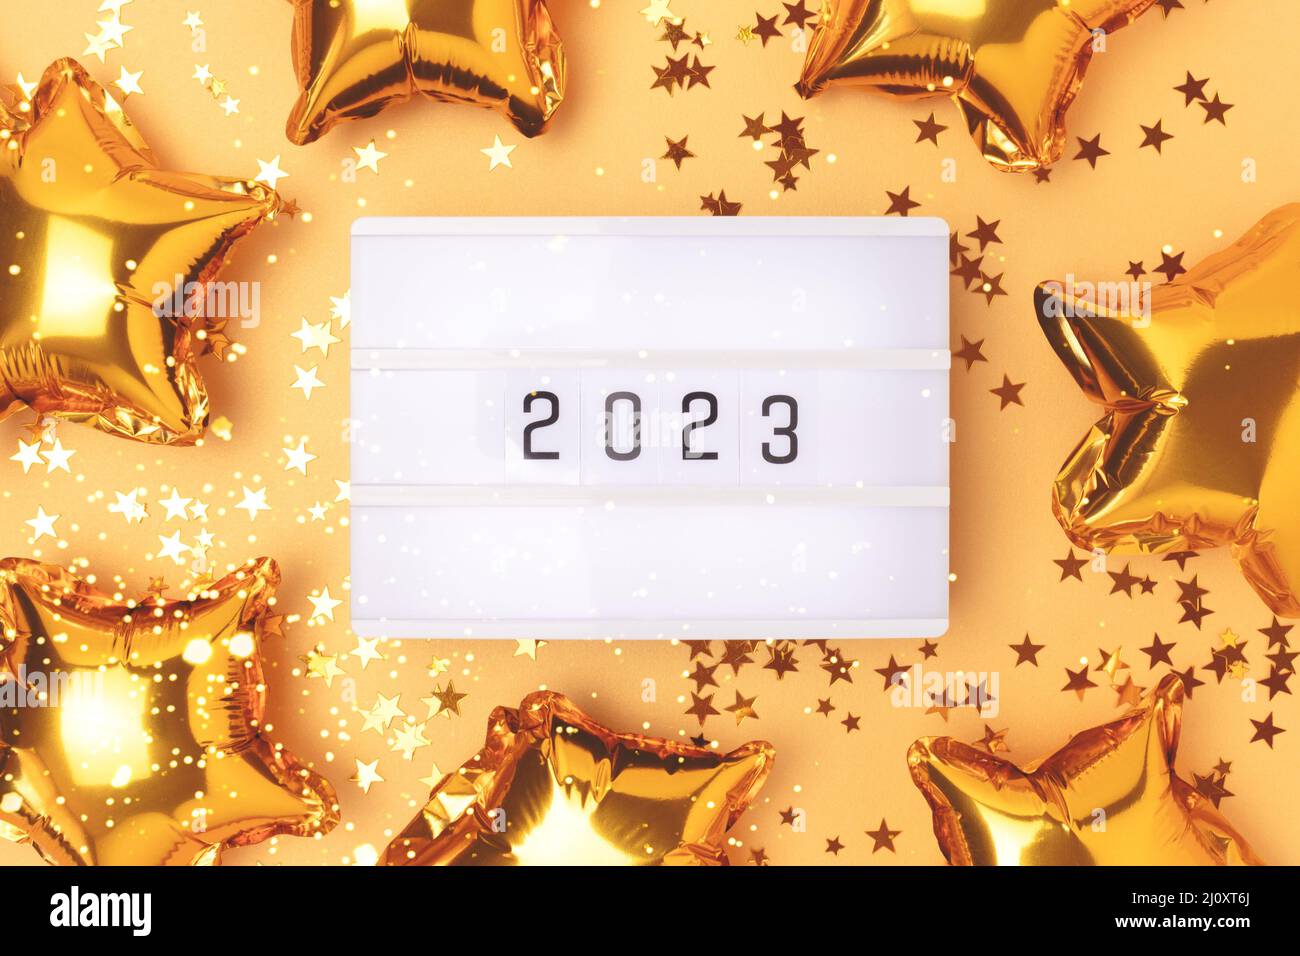 Lightbox with 2023 numbers on a gold colored background. Frame made of stars confetti and foil balloons. Stock Photo